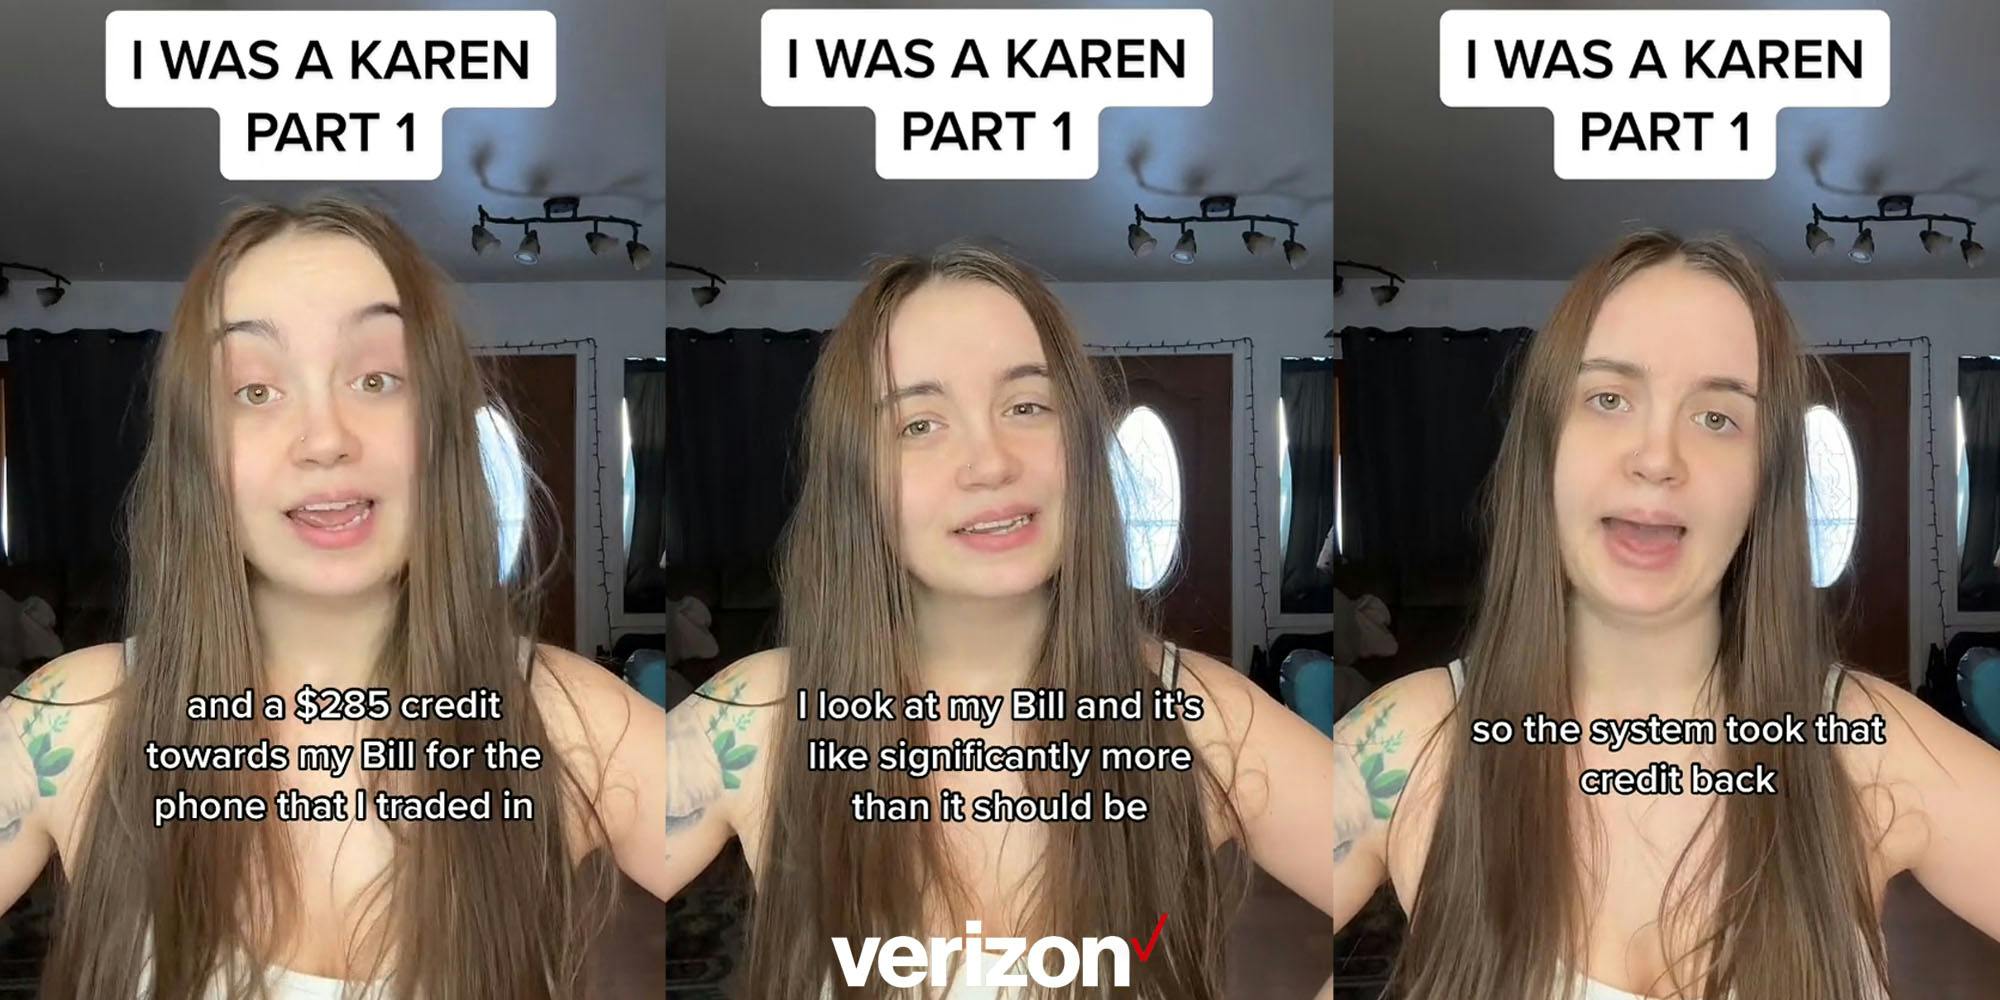 woman speaking caption "I WAS A KAREN PART 1" "and a $285 credit towards my bill for the phone that I traded in" (l) woman speaking caption "I WAS A KAREN PART 1" "I look at my bill and it's like significantly more than it should be" with Verizon logo centered at bottom (c) woman speaking caption "I WAS A KAREN PART 1" "so the system took that credit back" (r)